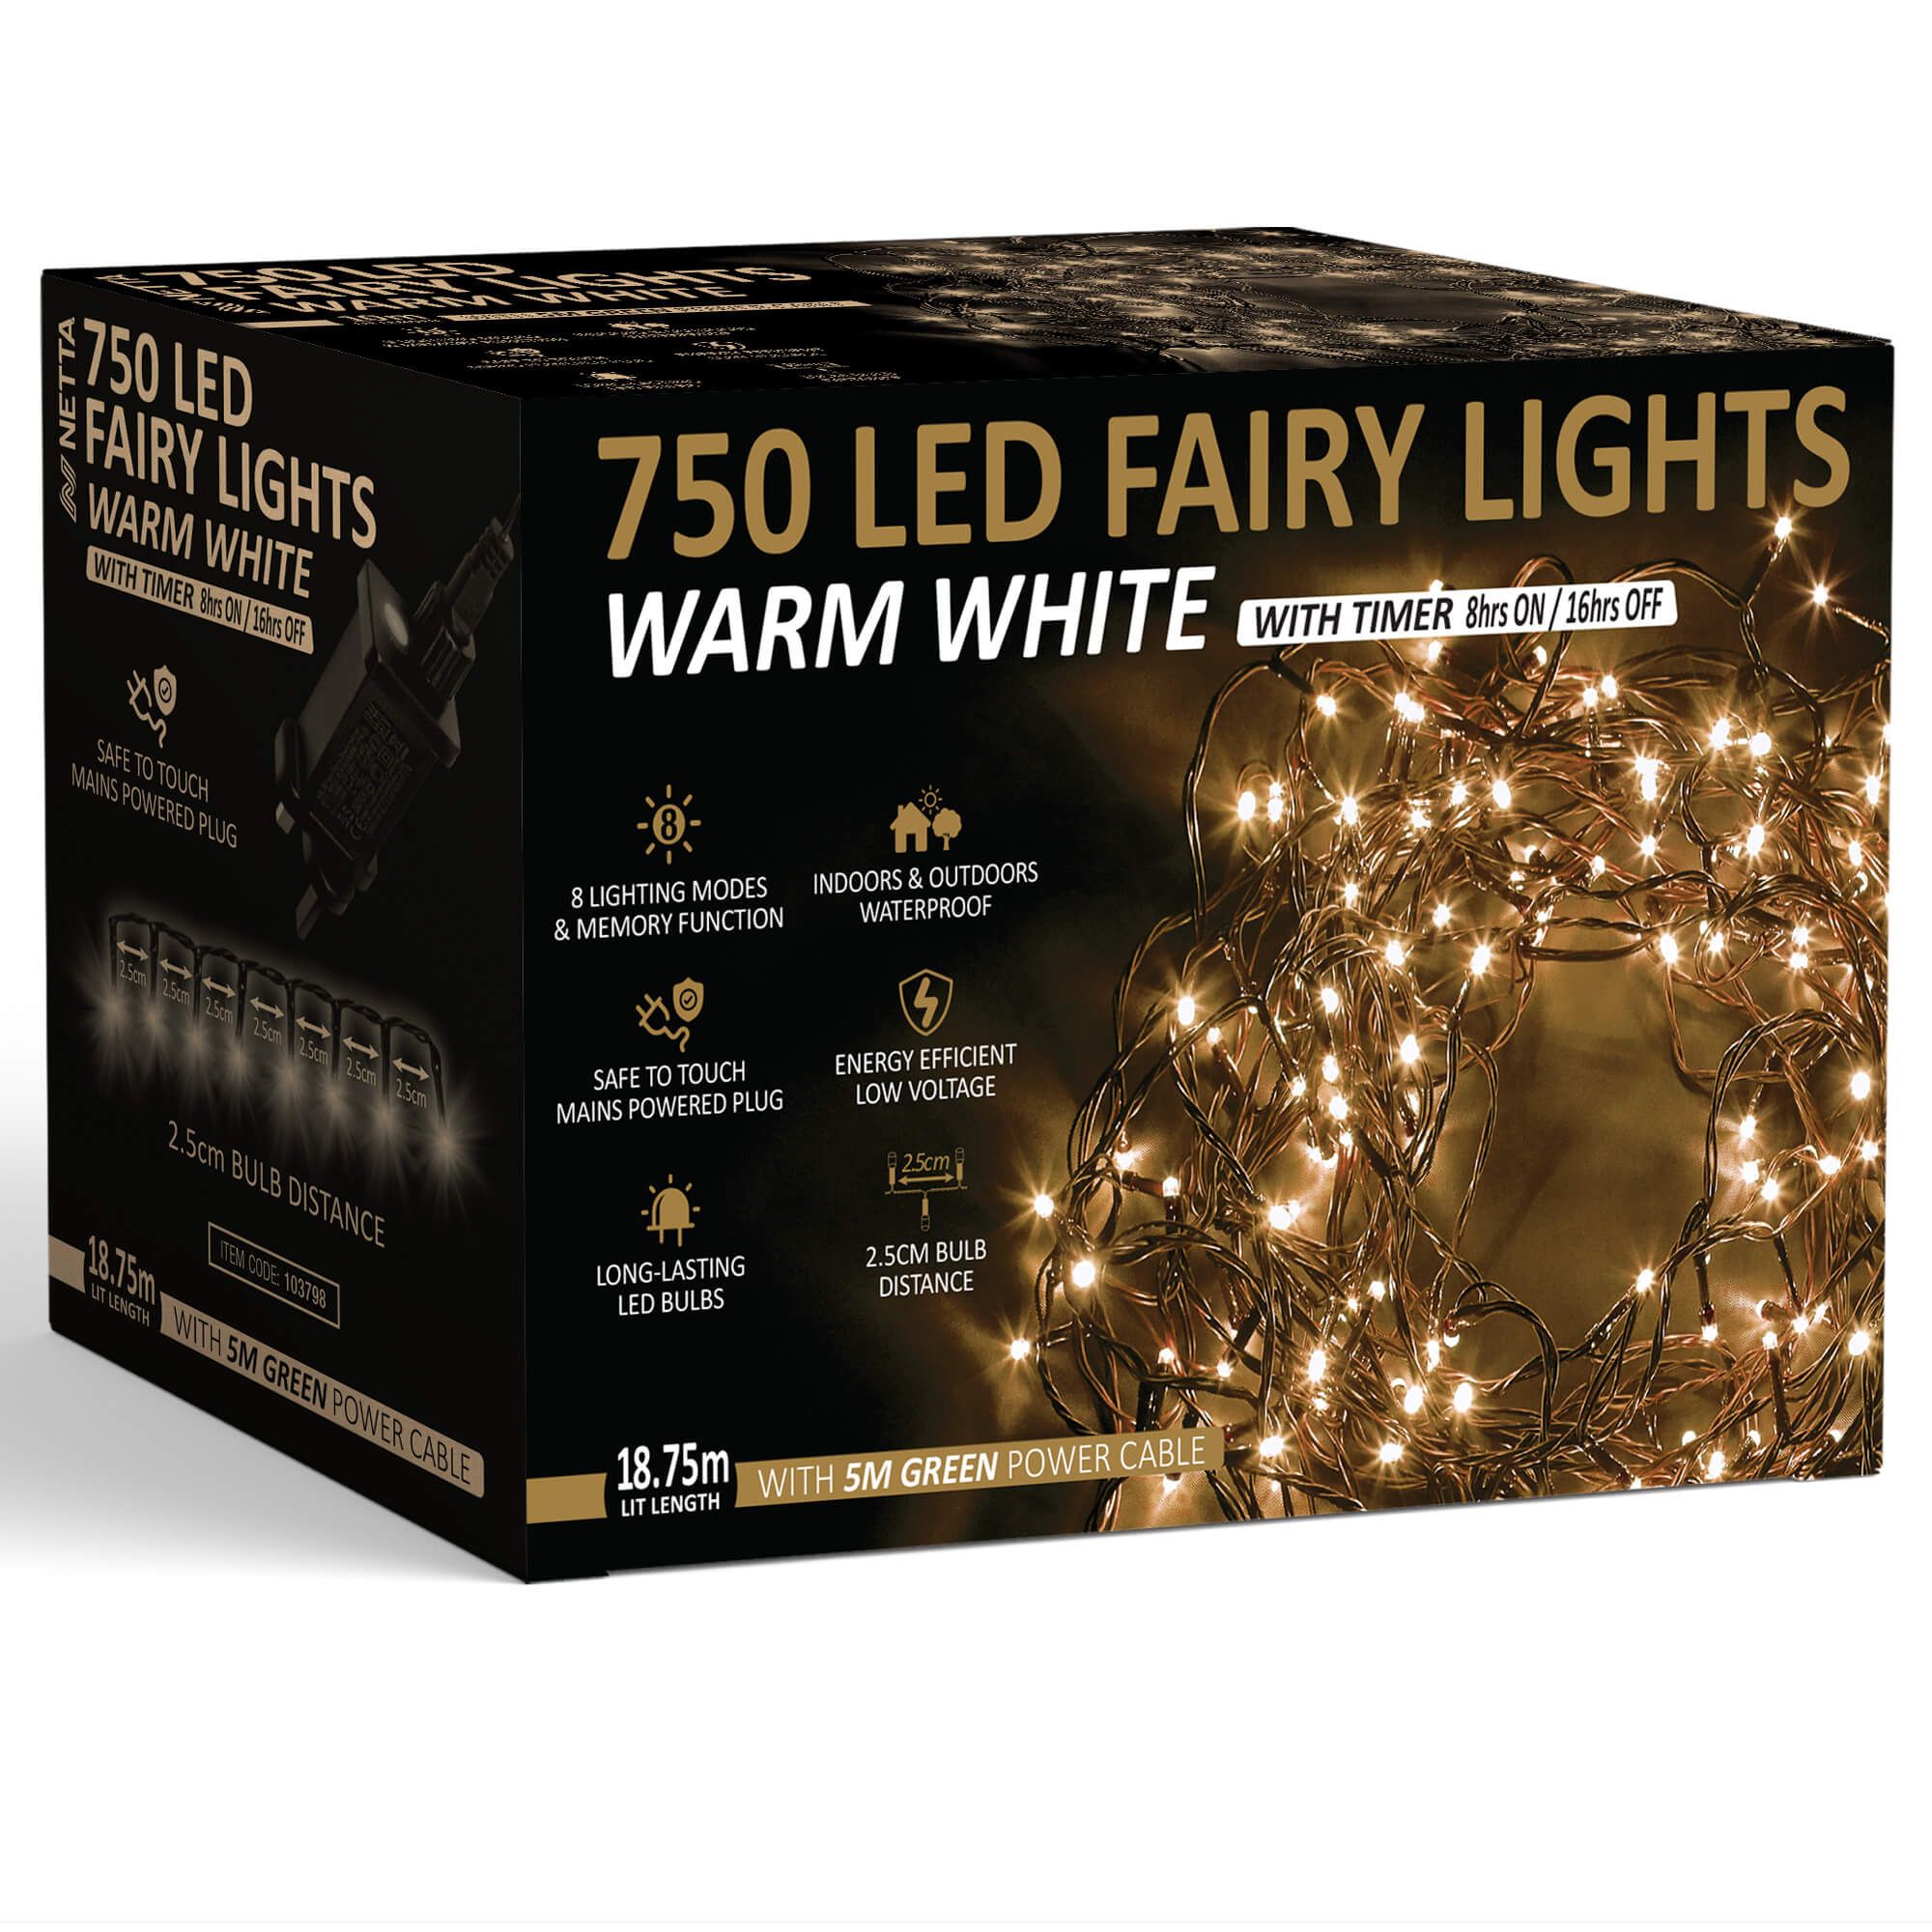 NETTA 750 LED Fairy String Lights 18.75M Indoor & Outdoor Christmas Tree Lights Green Cable - Warm White